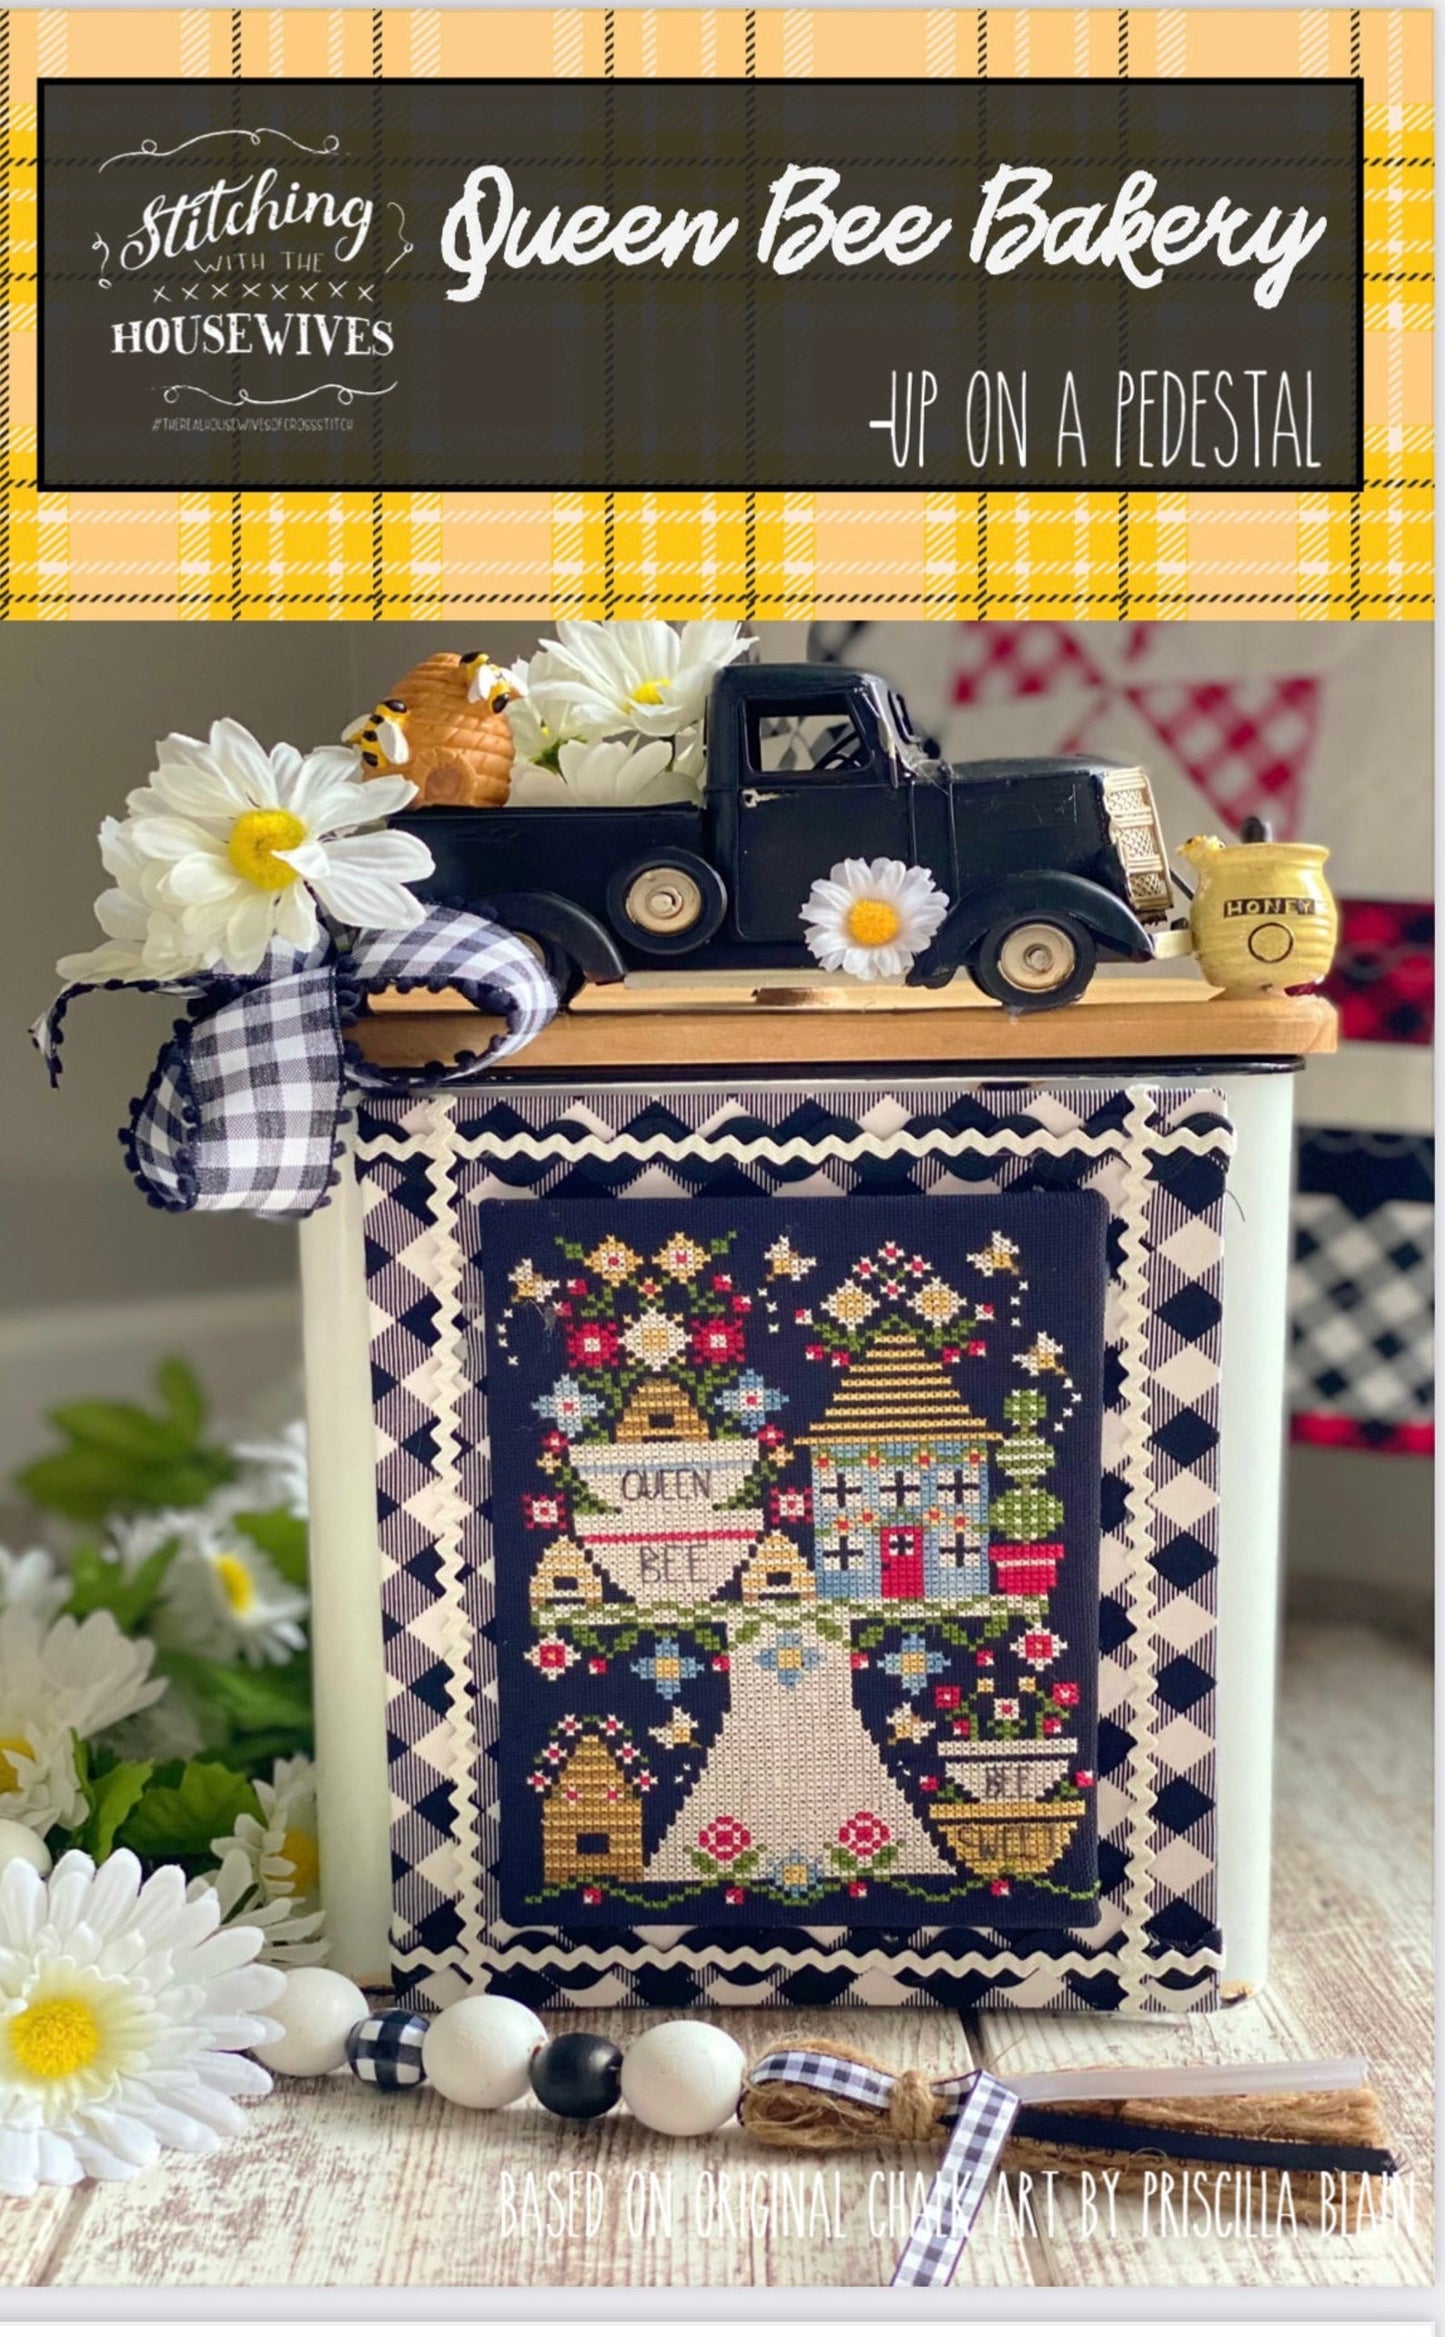 Queen Bee Bakery by Stitching With The Housewives